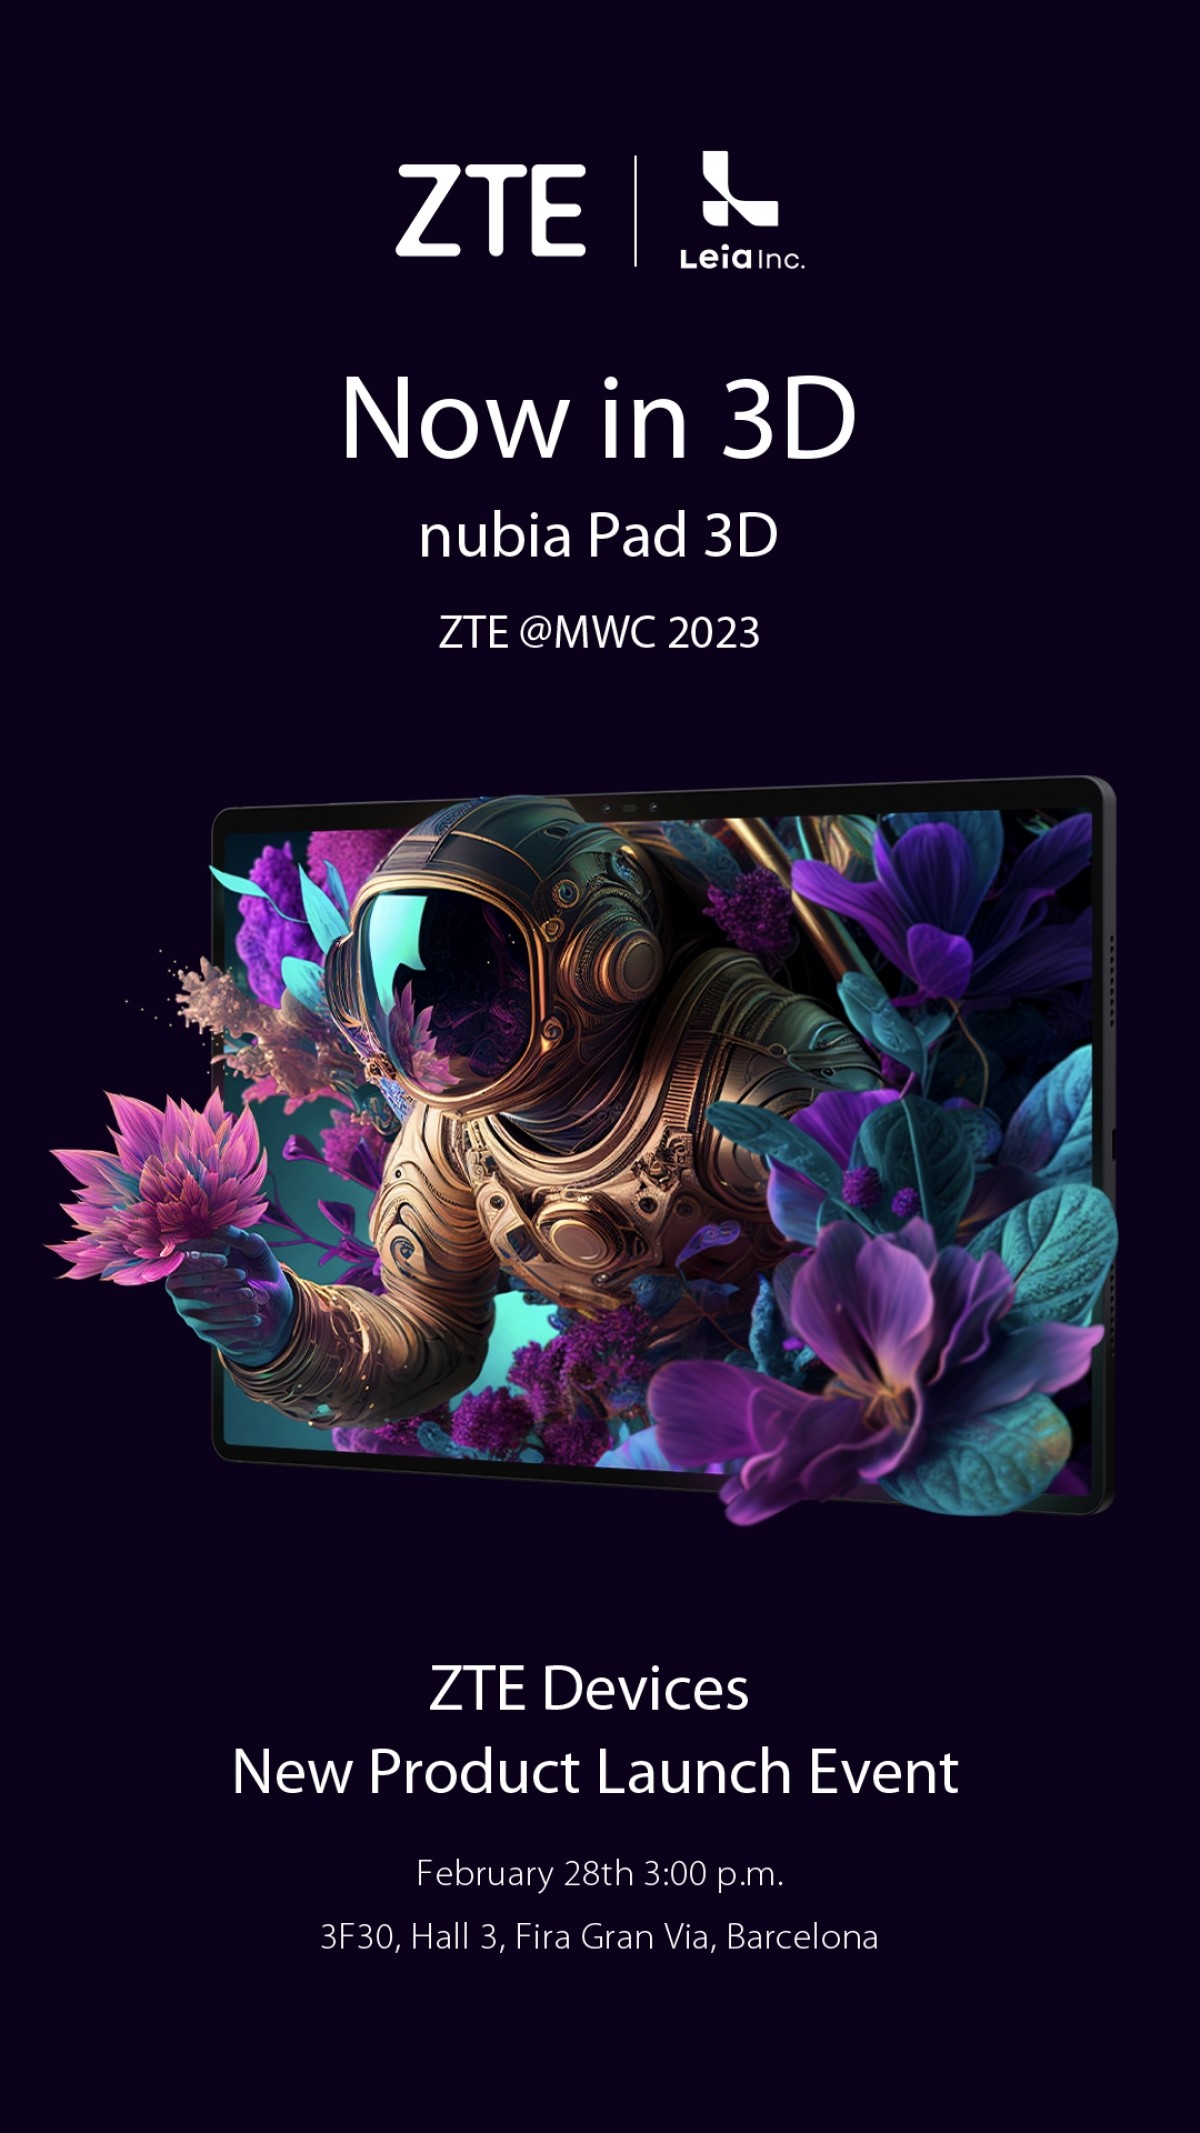 ZTE to bring Nubia Pad 3D at MWC